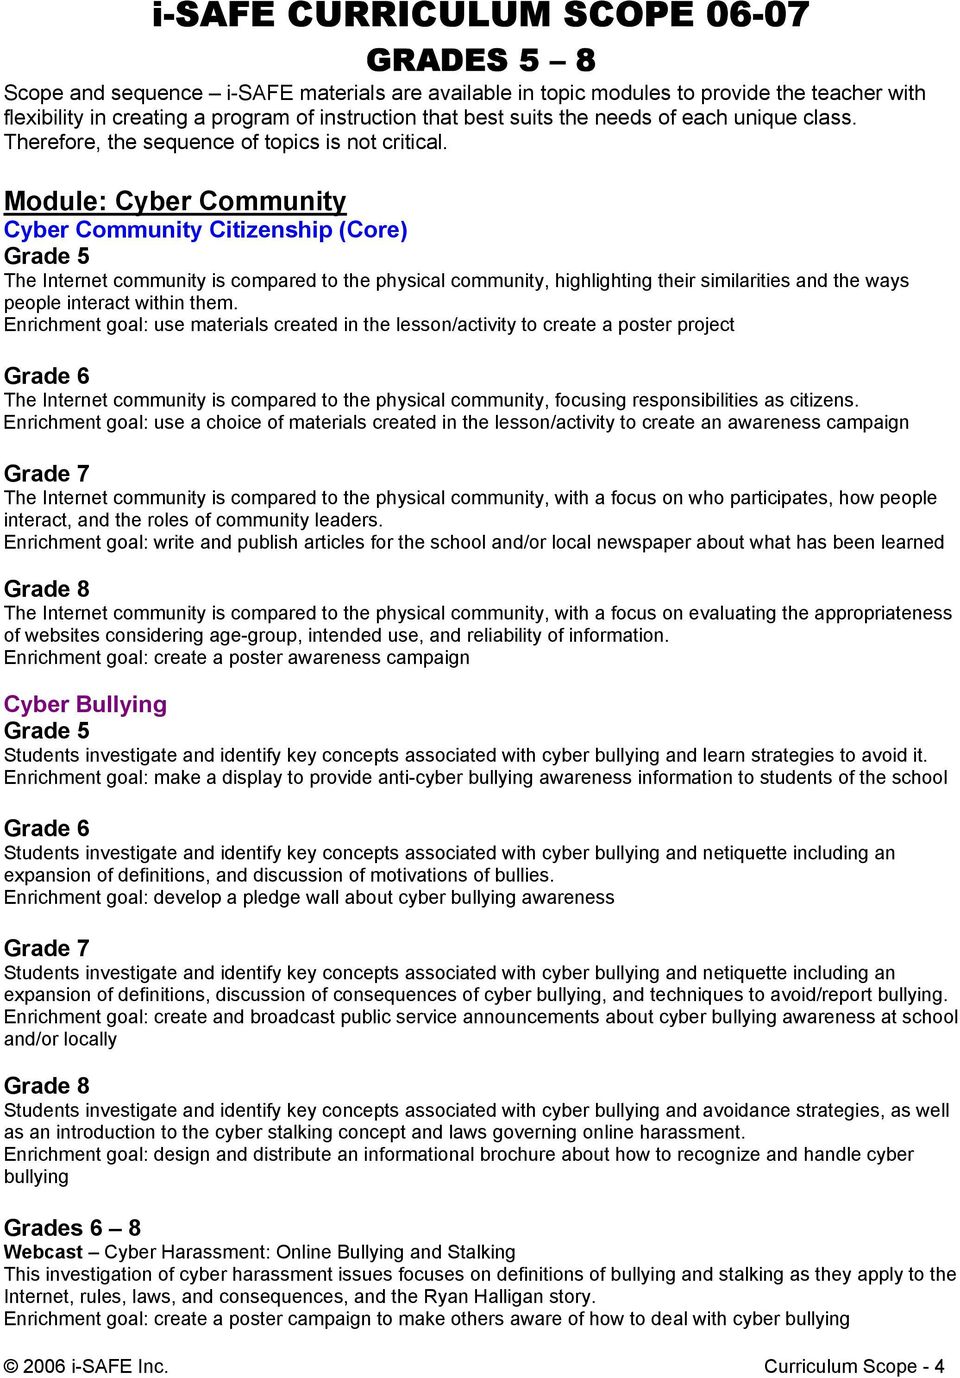 Module: Cyber Community Cyber Community Citizenship (Core) Grade 5 The Internet community is compared to the physical community, highlighting their similarities and the ways people interact within